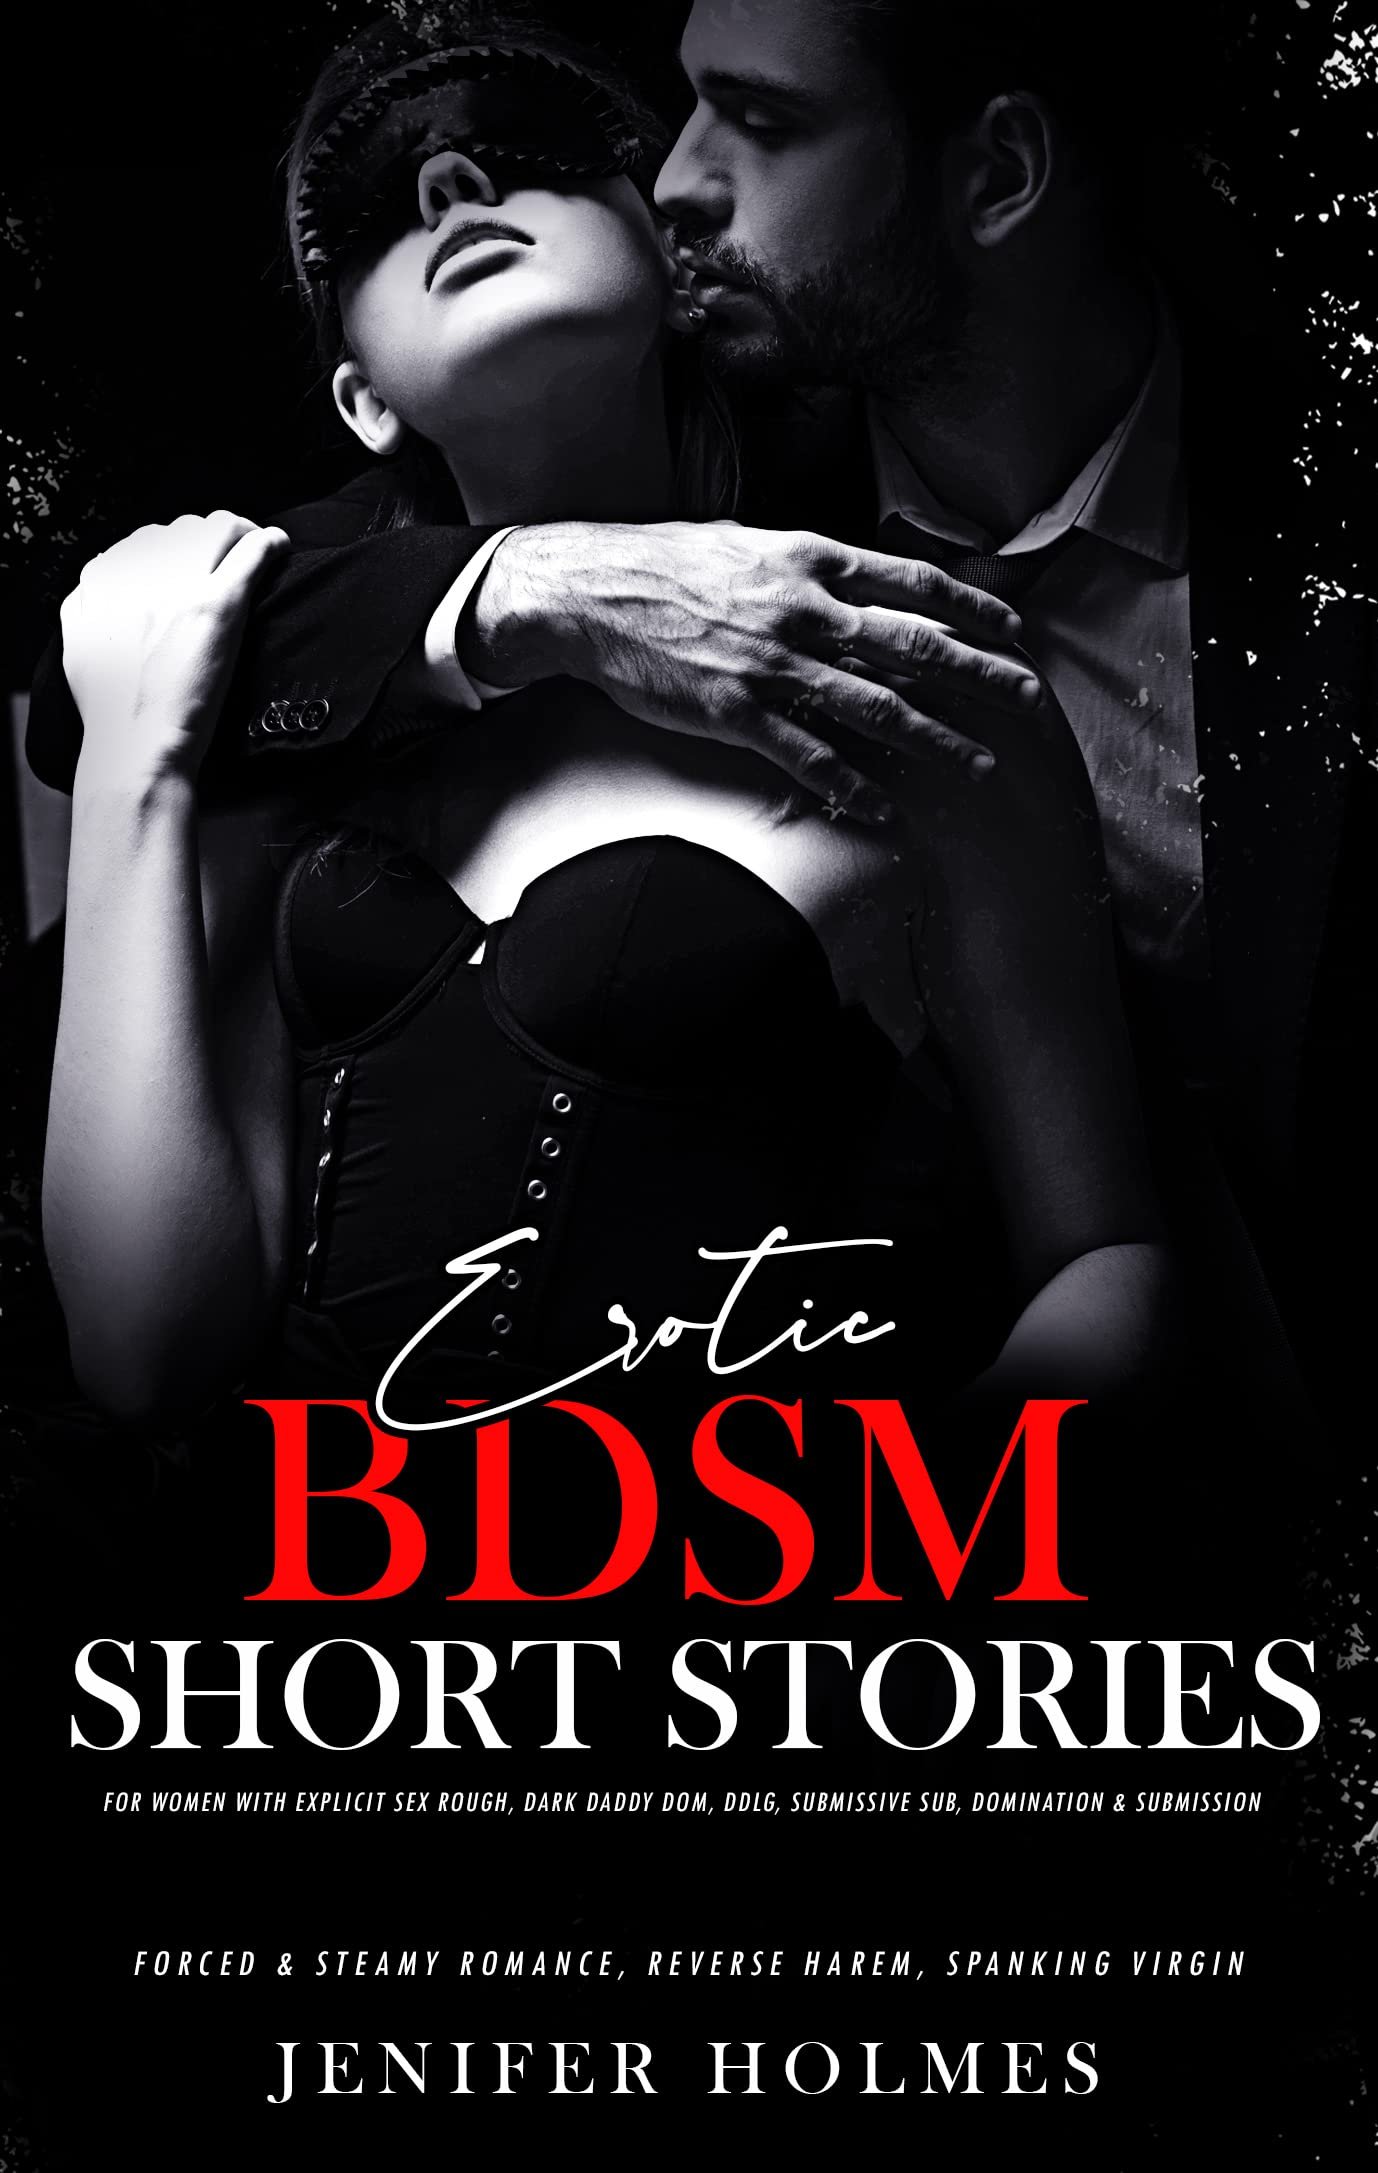 Erotic BDSM Short Stories for Women with Explicit Sex: Rough, Dark Daddy Dom, DDlg, Submissive Sub, Domination & Submission (Forced & Steamy Romance, Reverse Harem, Spanking Virgin Book 1) Cover